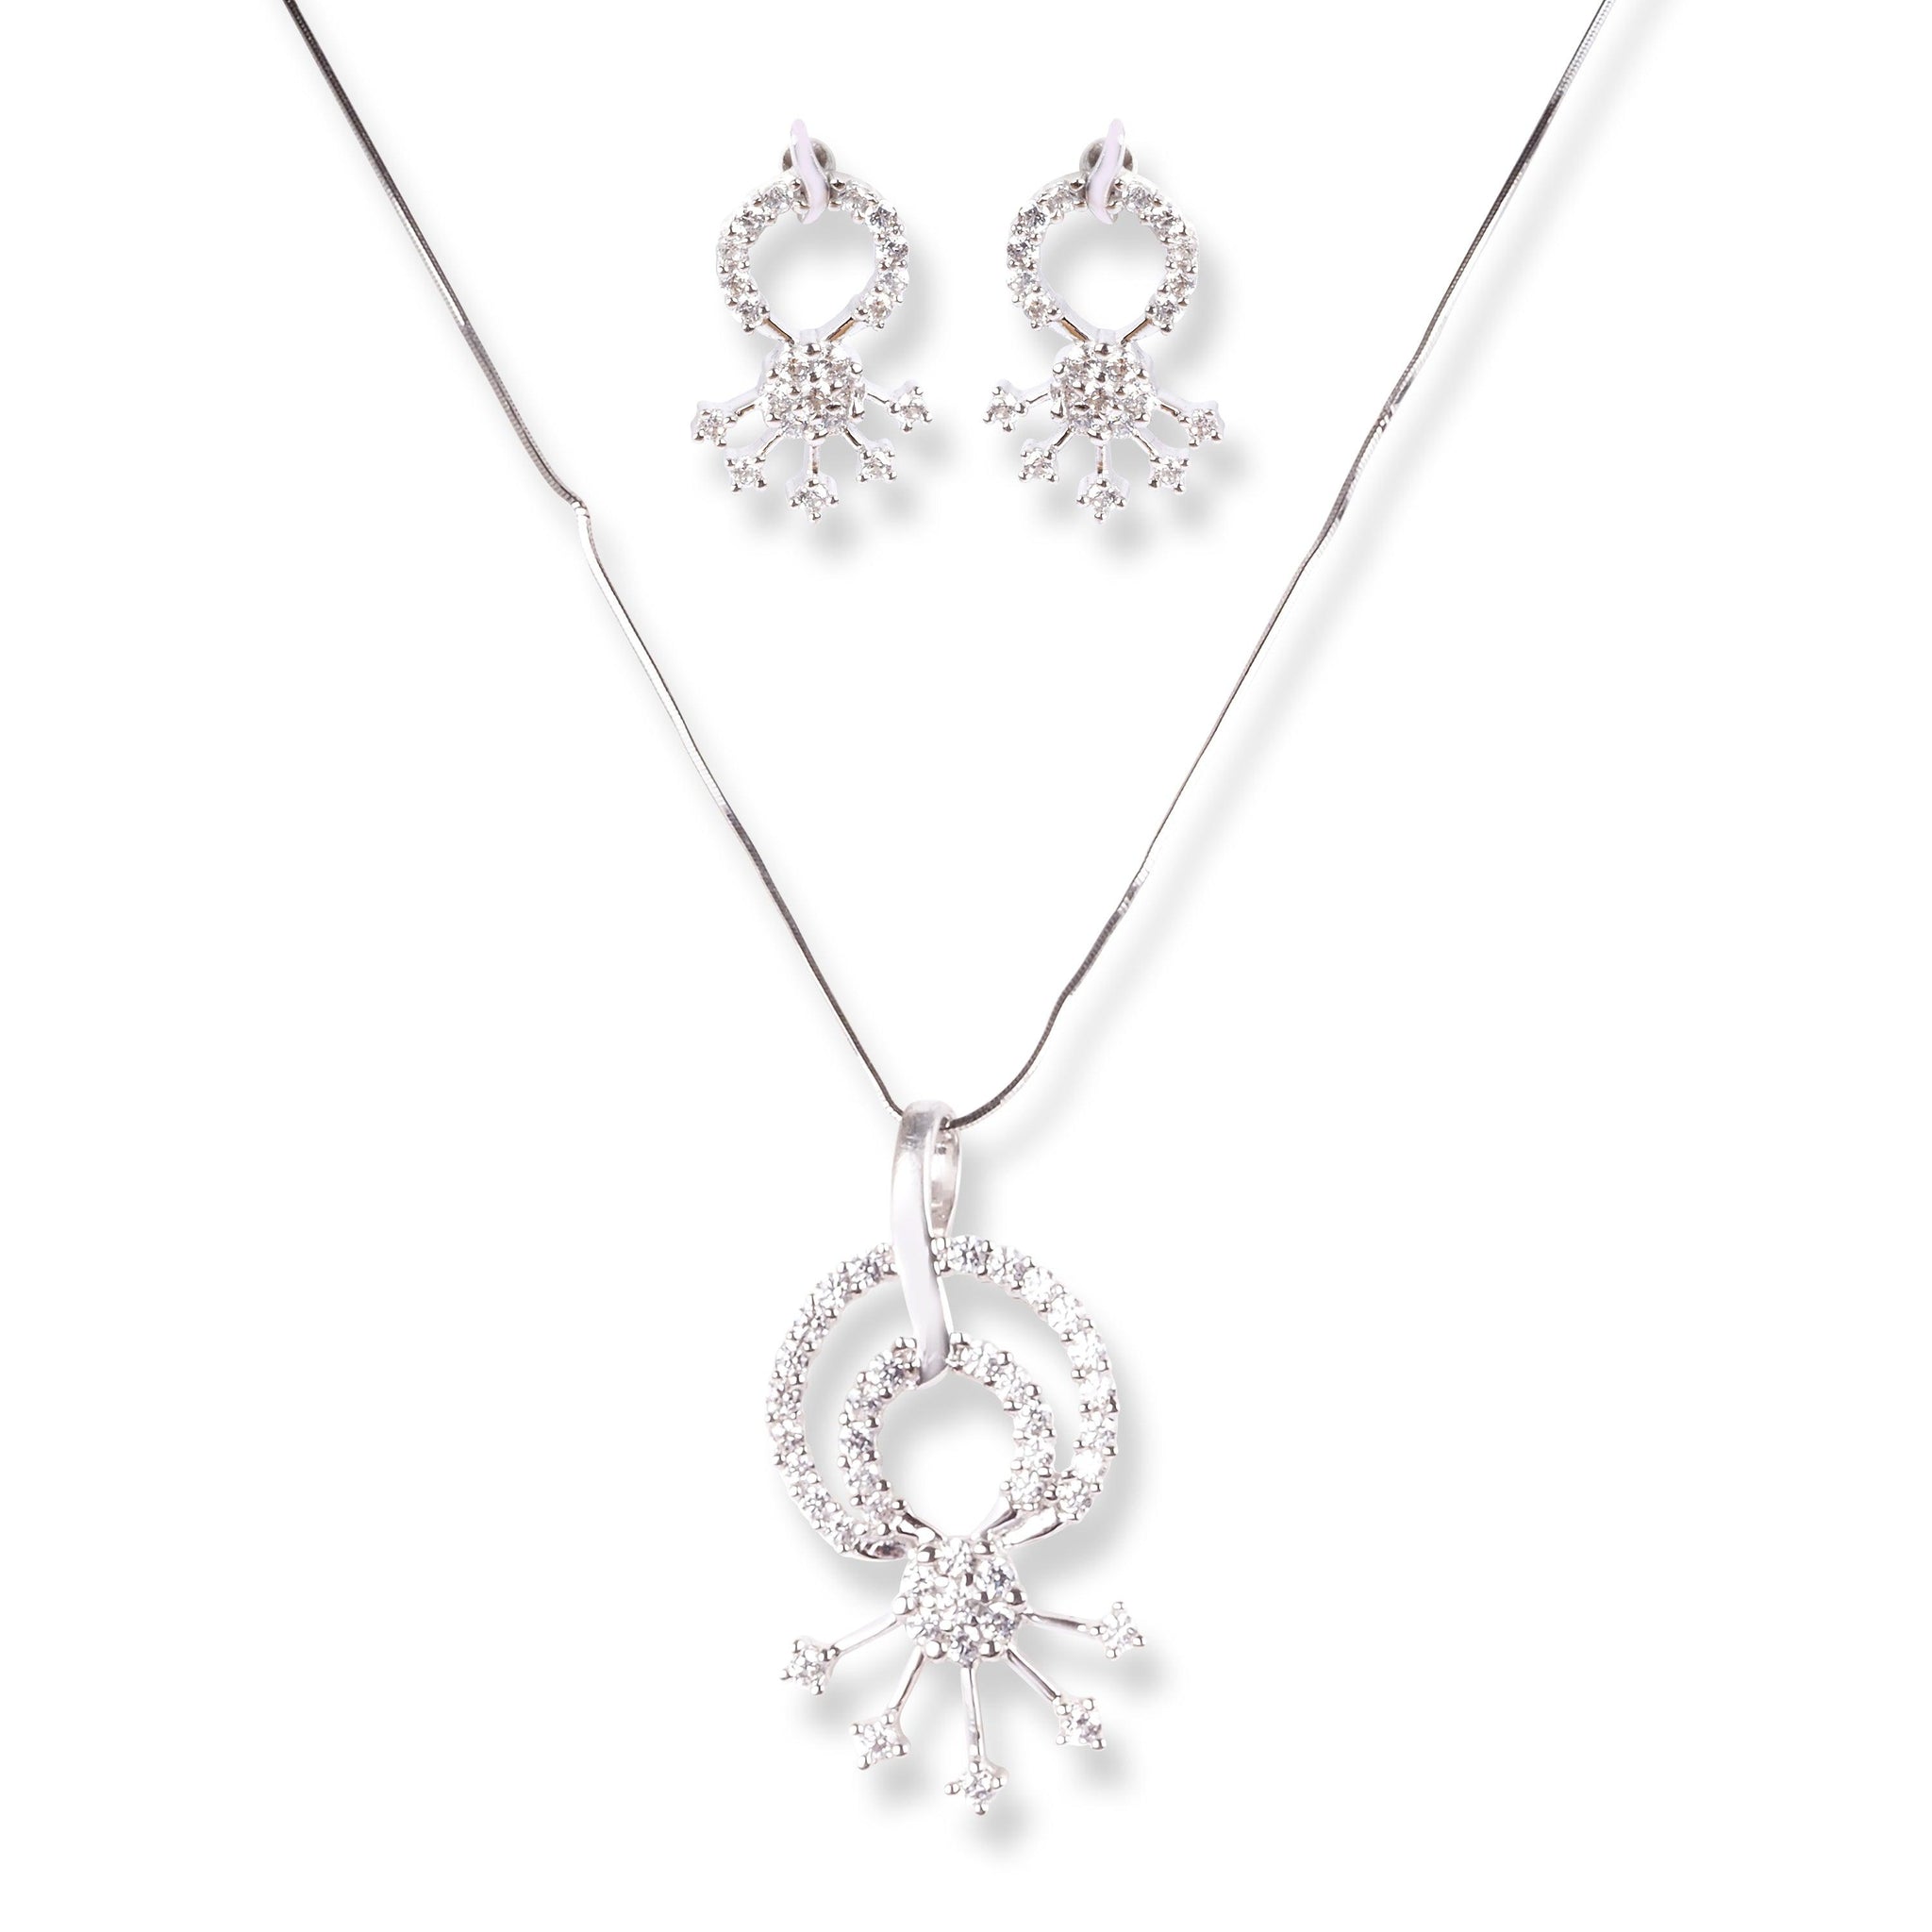 18ct White Gold Set with Cubic Zirconia Stones (Pendant + Stud Earrings)